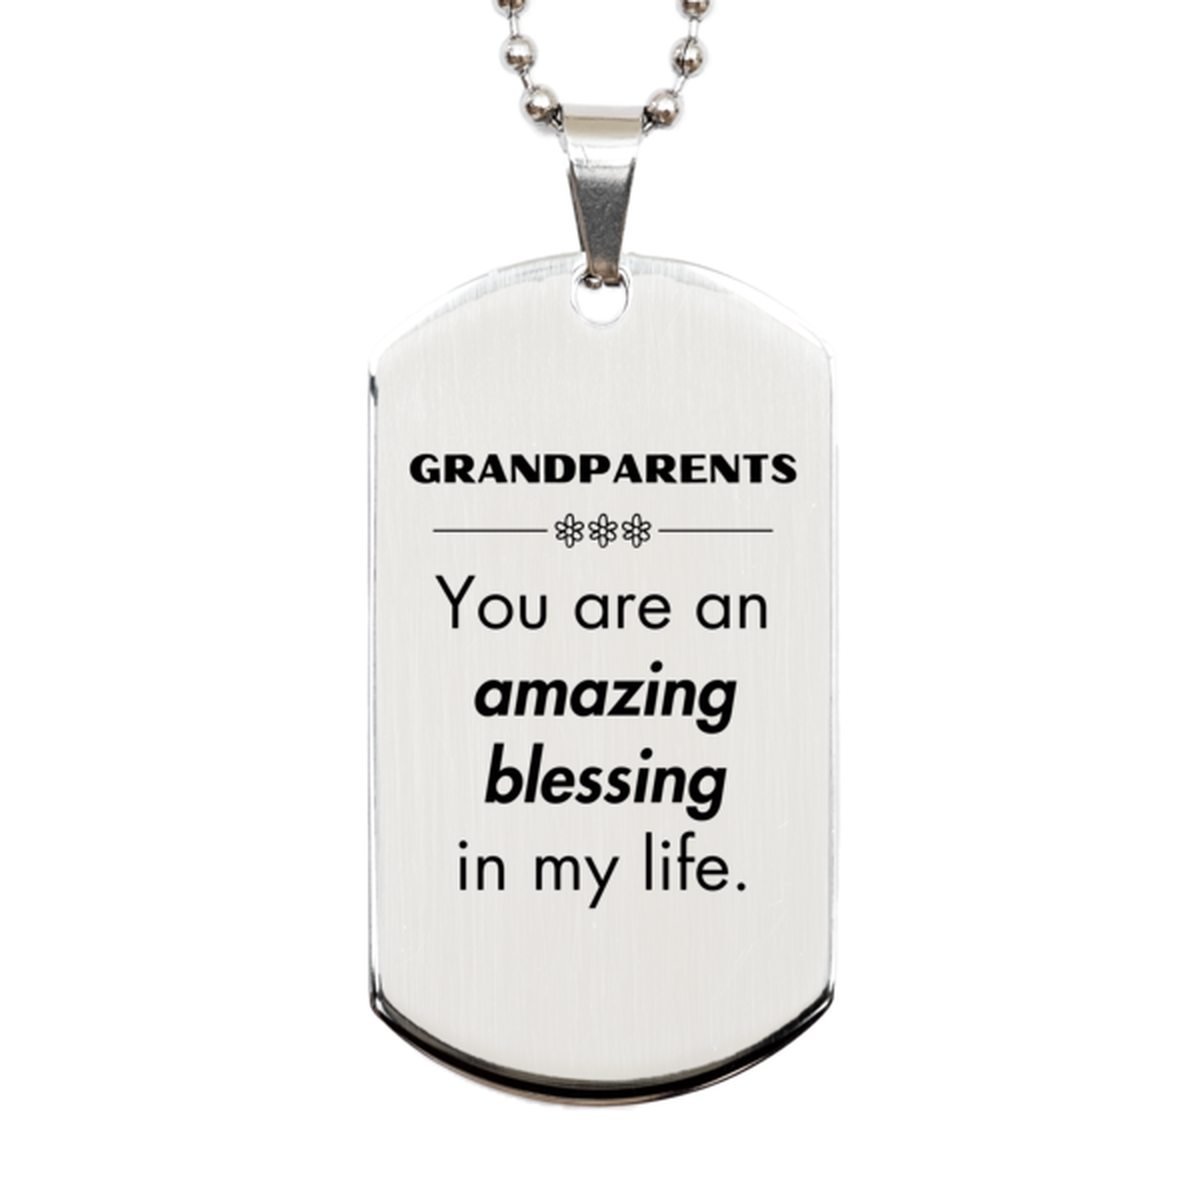 Grandparents Silver Dog Tag, You are an amazing blessing in my life, Thank You Gifts For Grandparents, Inspirational Birthday Christmas Unique Gifts For Grandparents